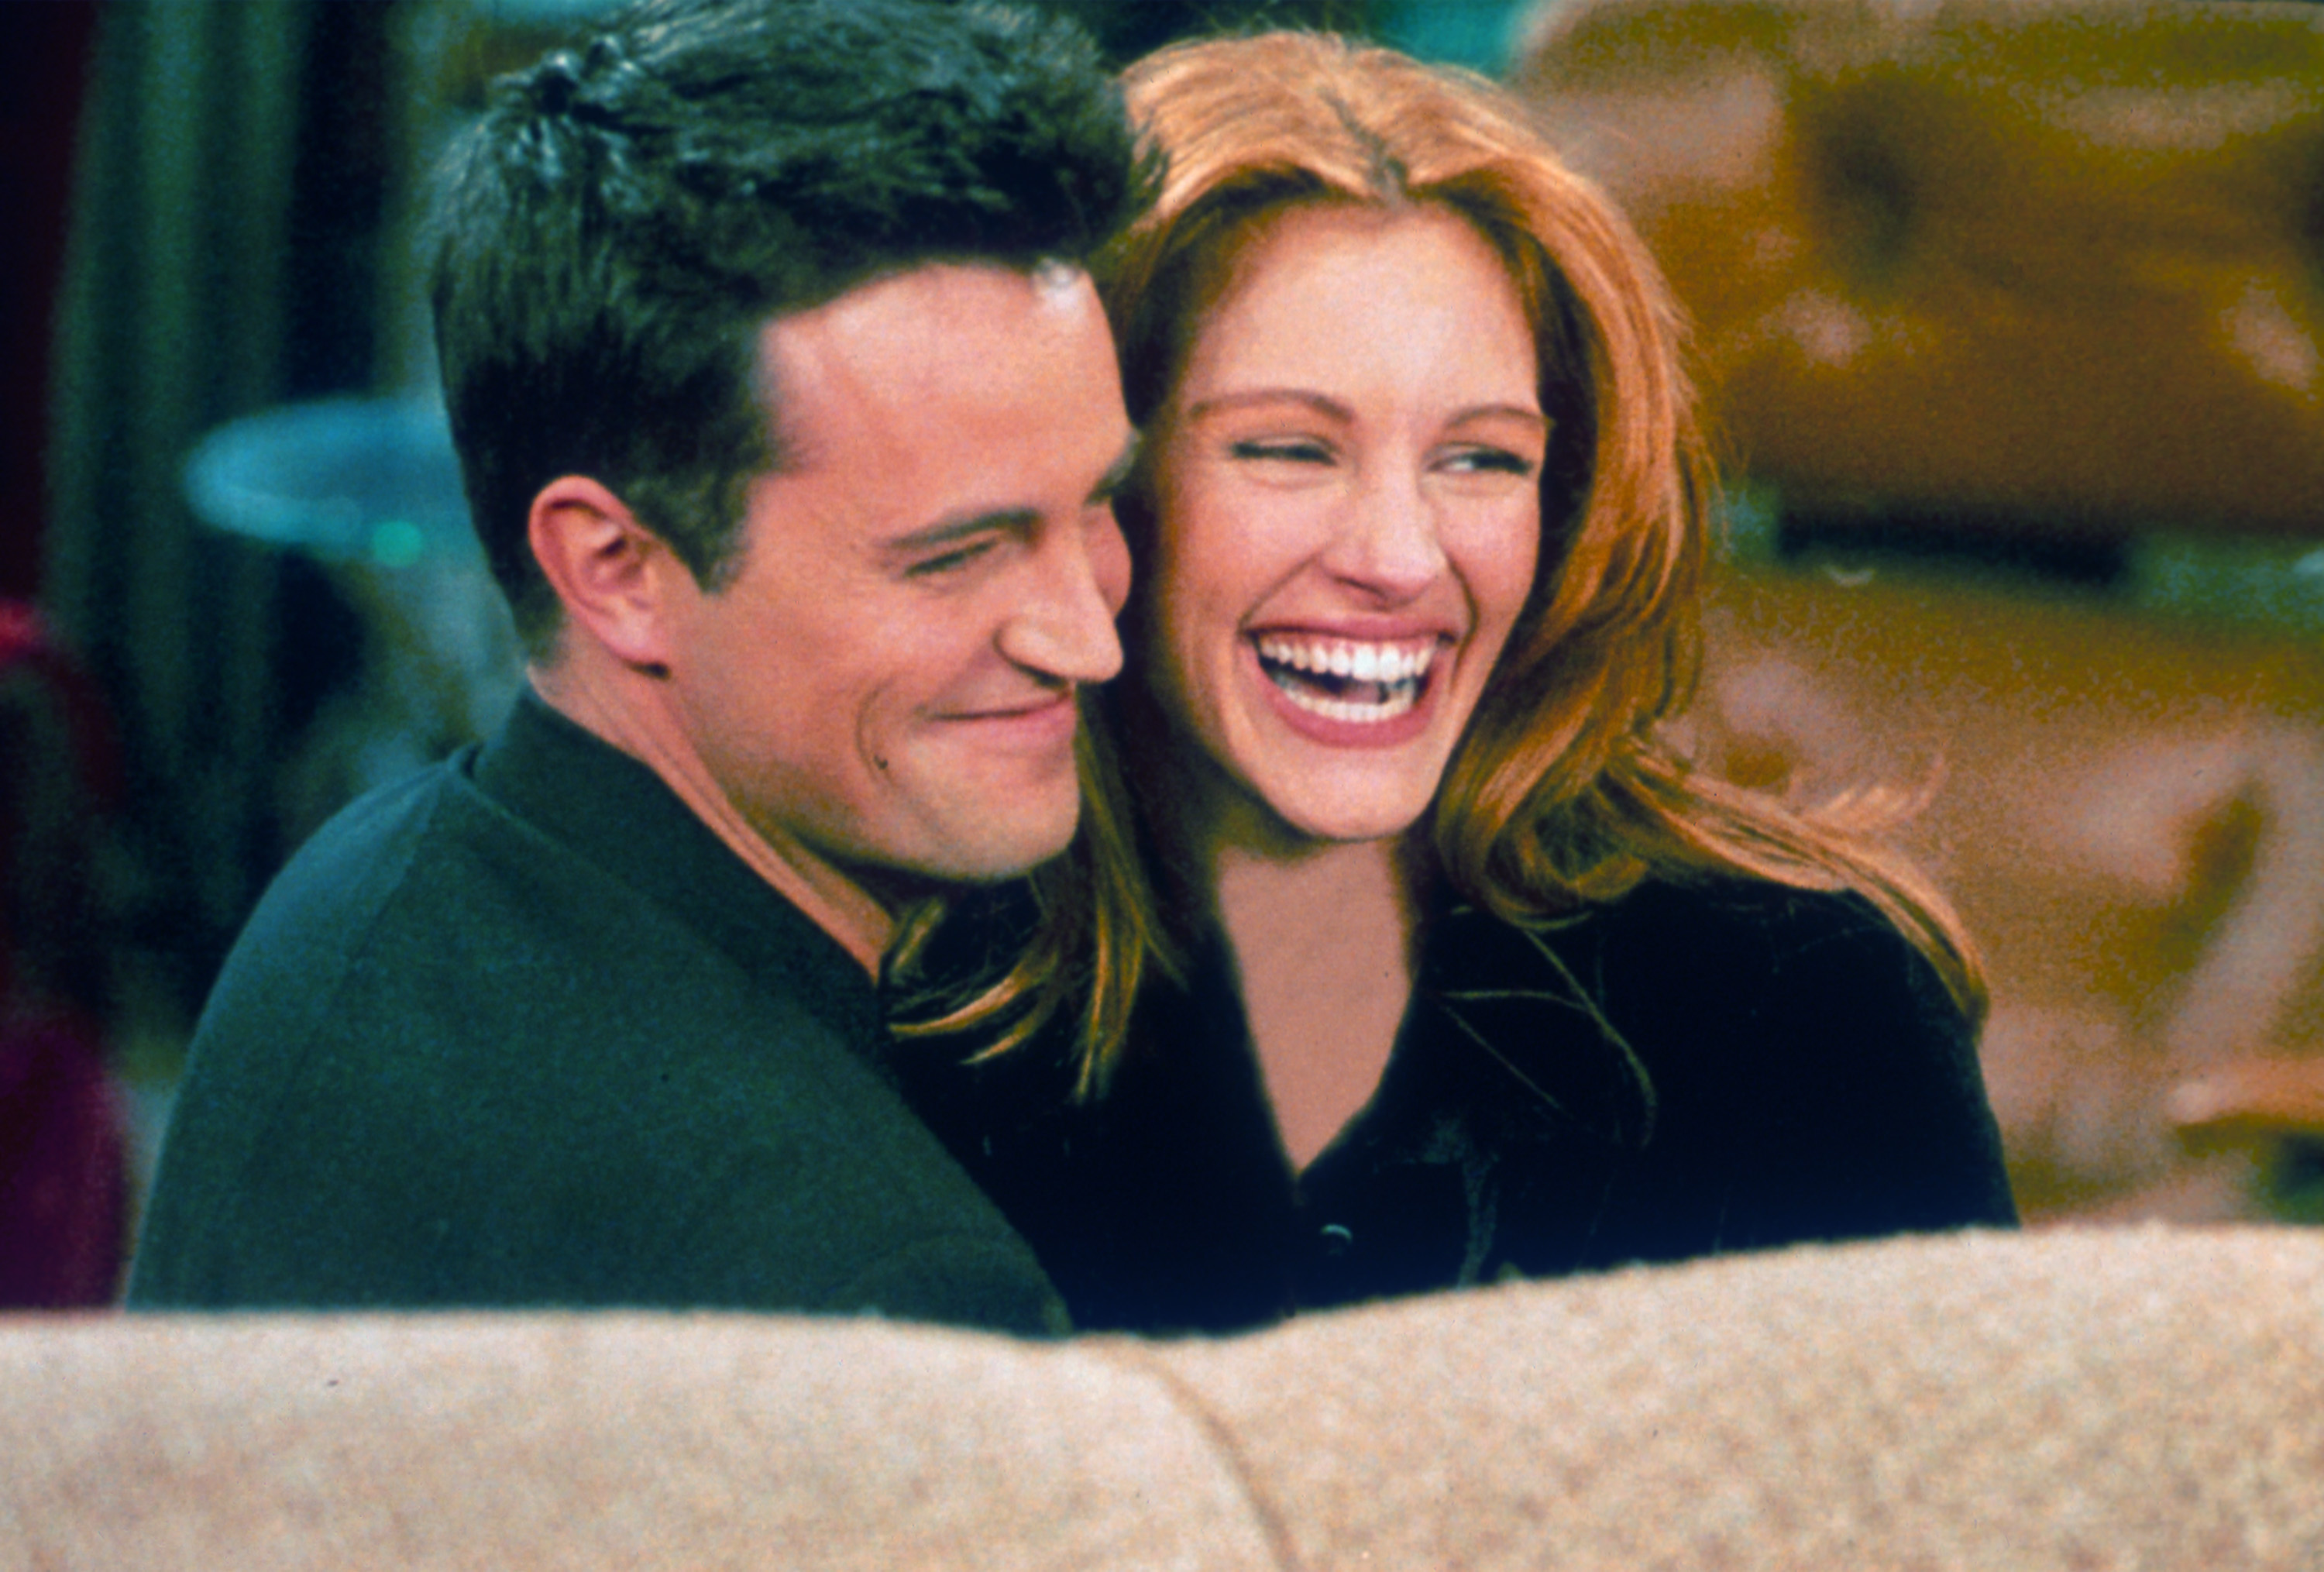 Matthew Perry and Julia Roberts hug each other on the set of "Friends." | Source: Getty Images